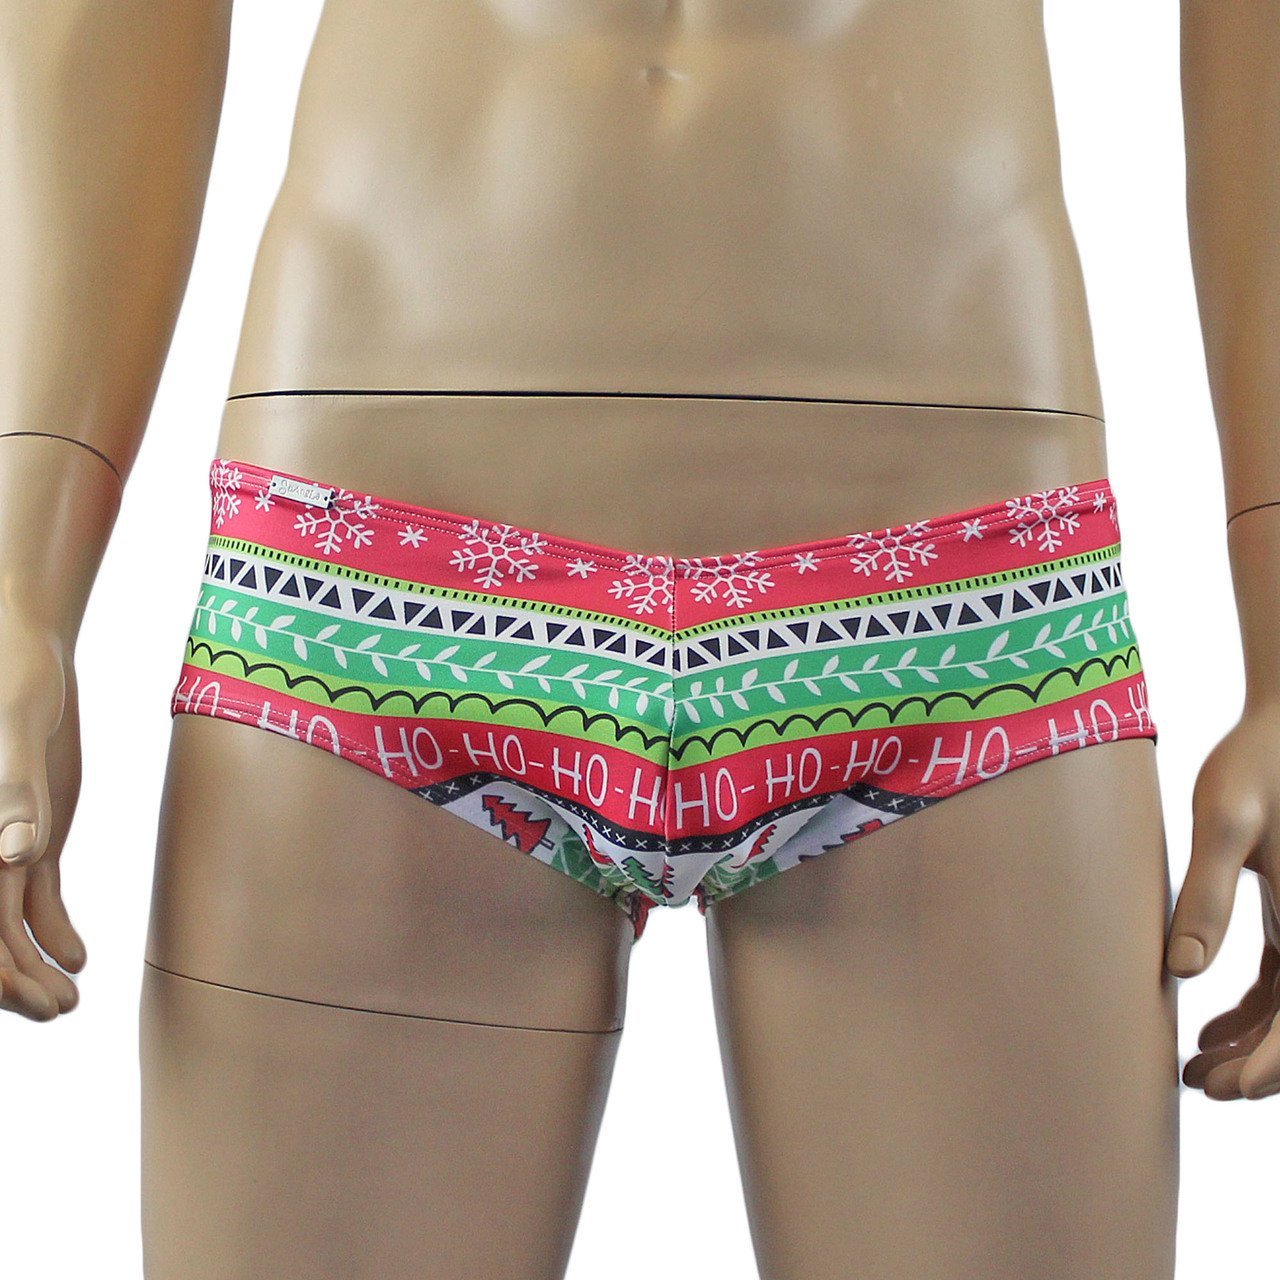 These boxer briefs might not have the razzle-dazzle look of